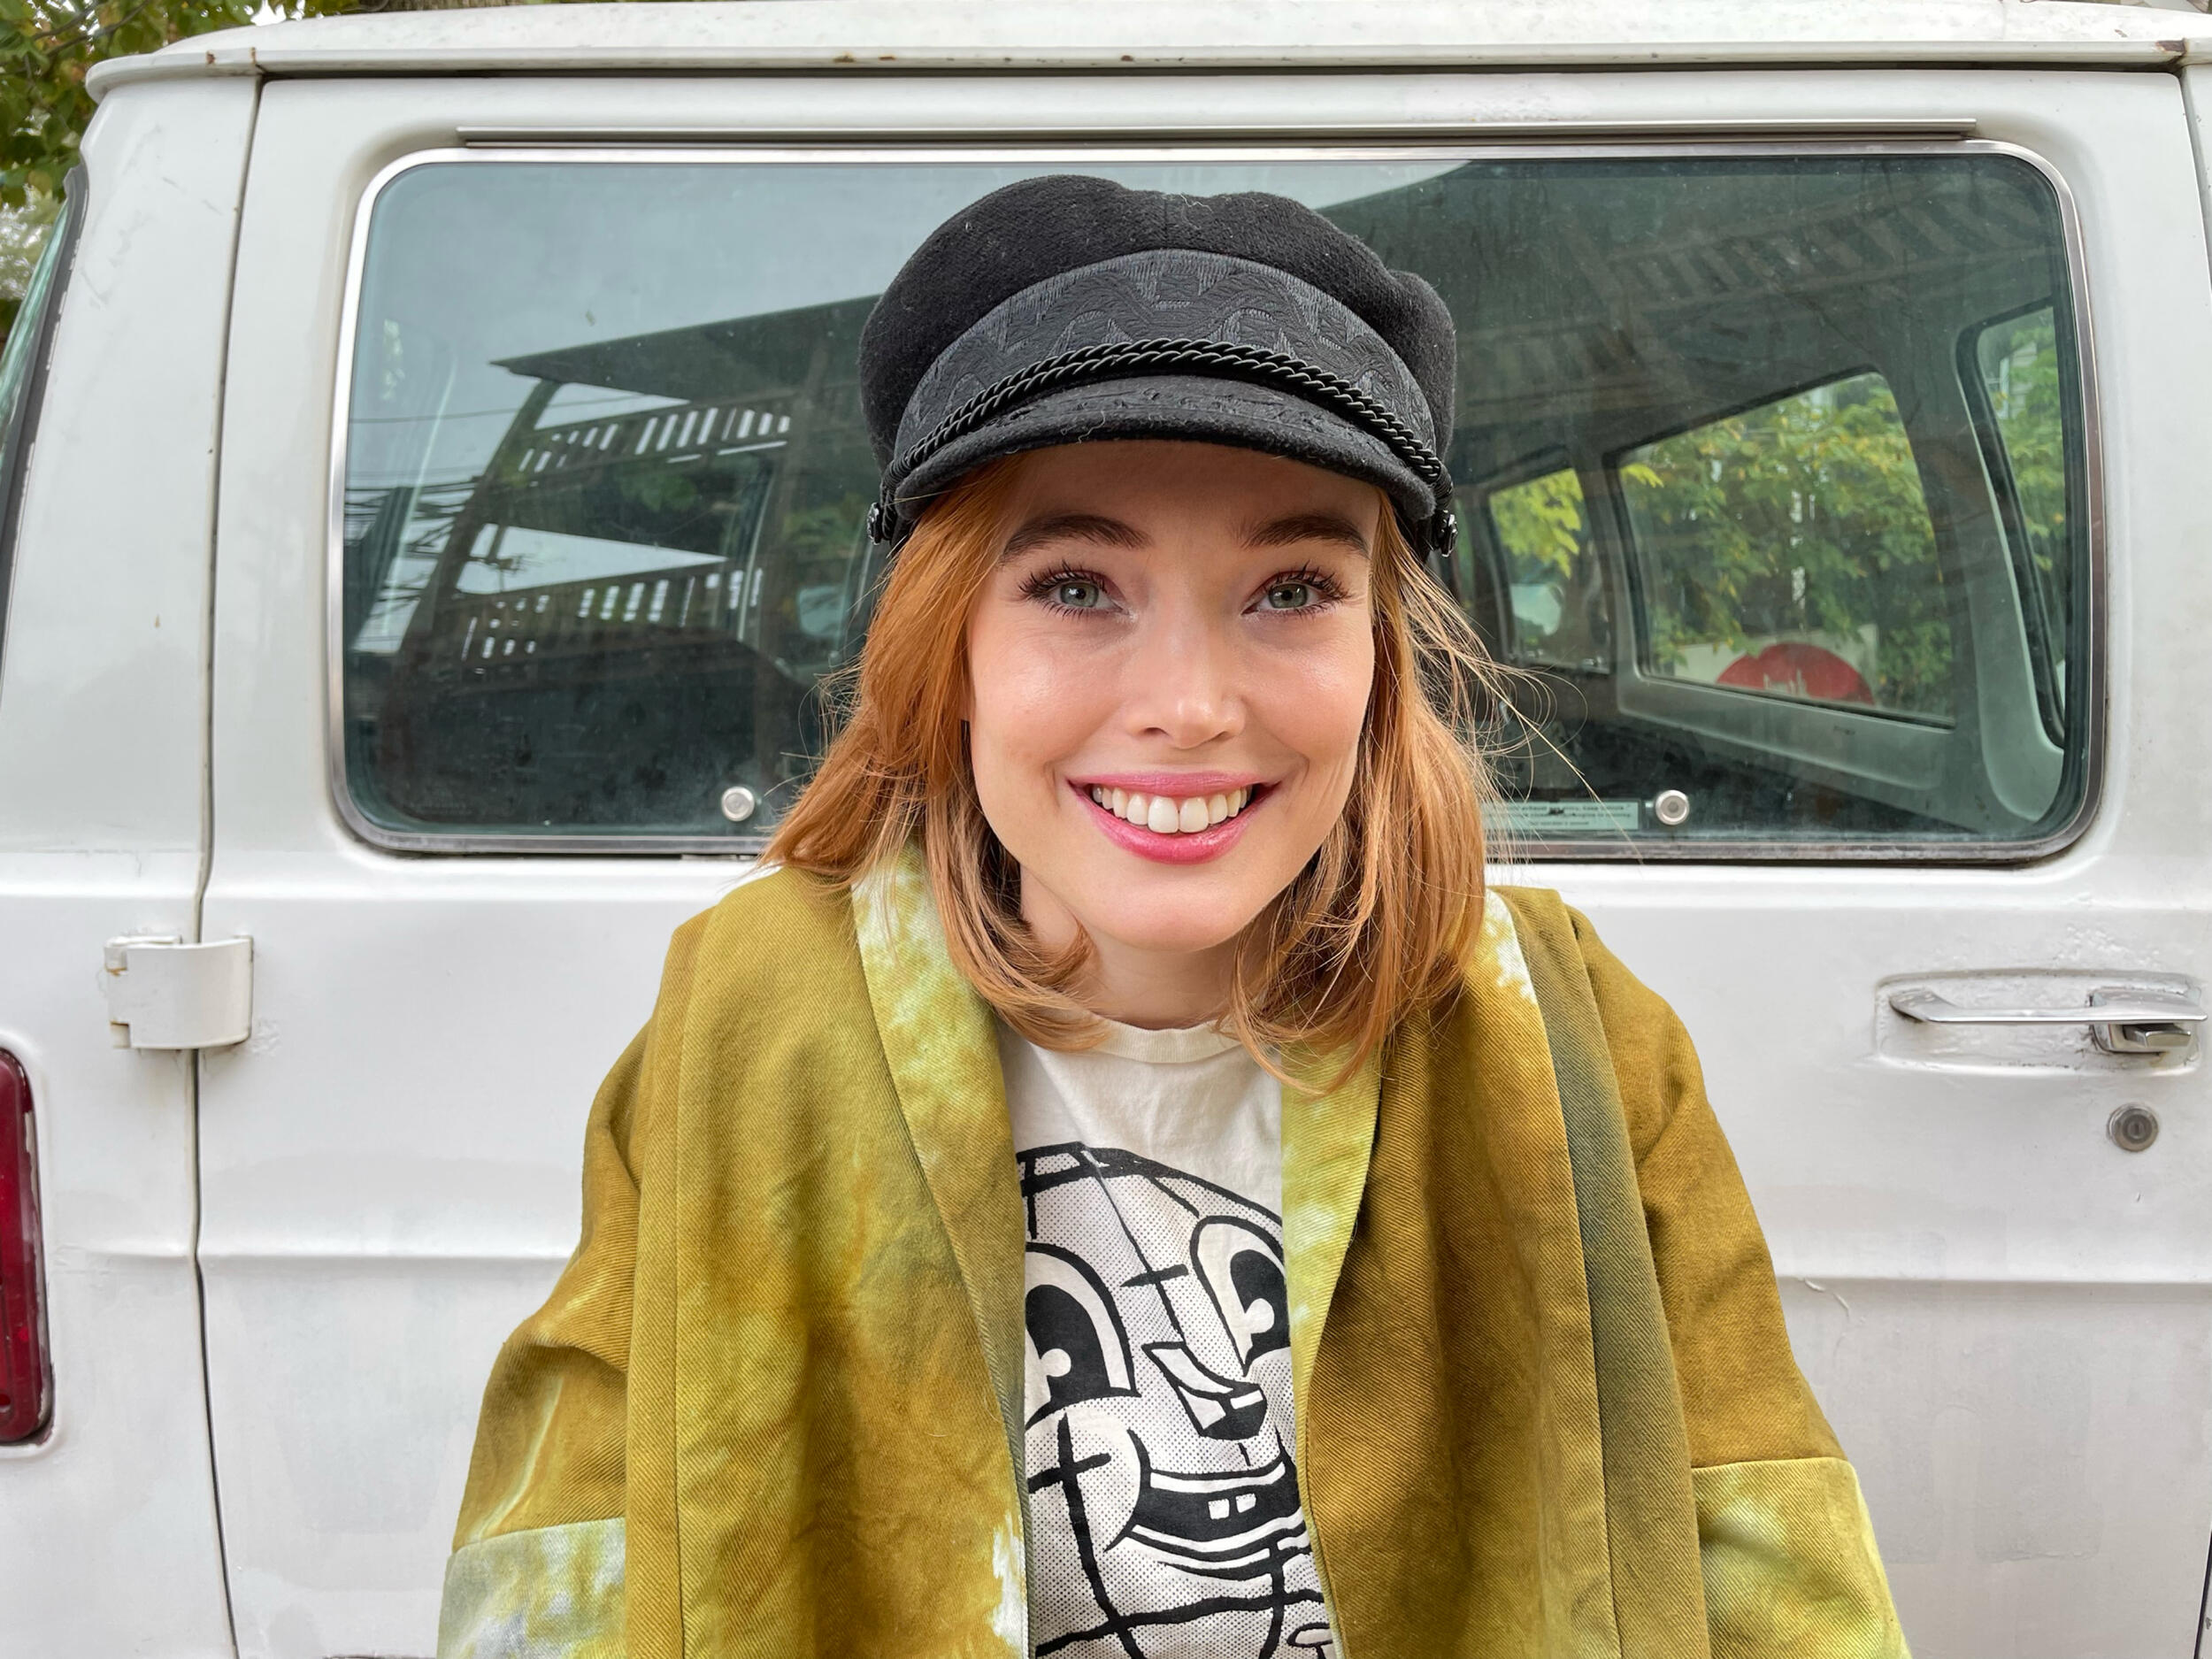 A woman wearing a paper boy hat and yellow jacket smiling 